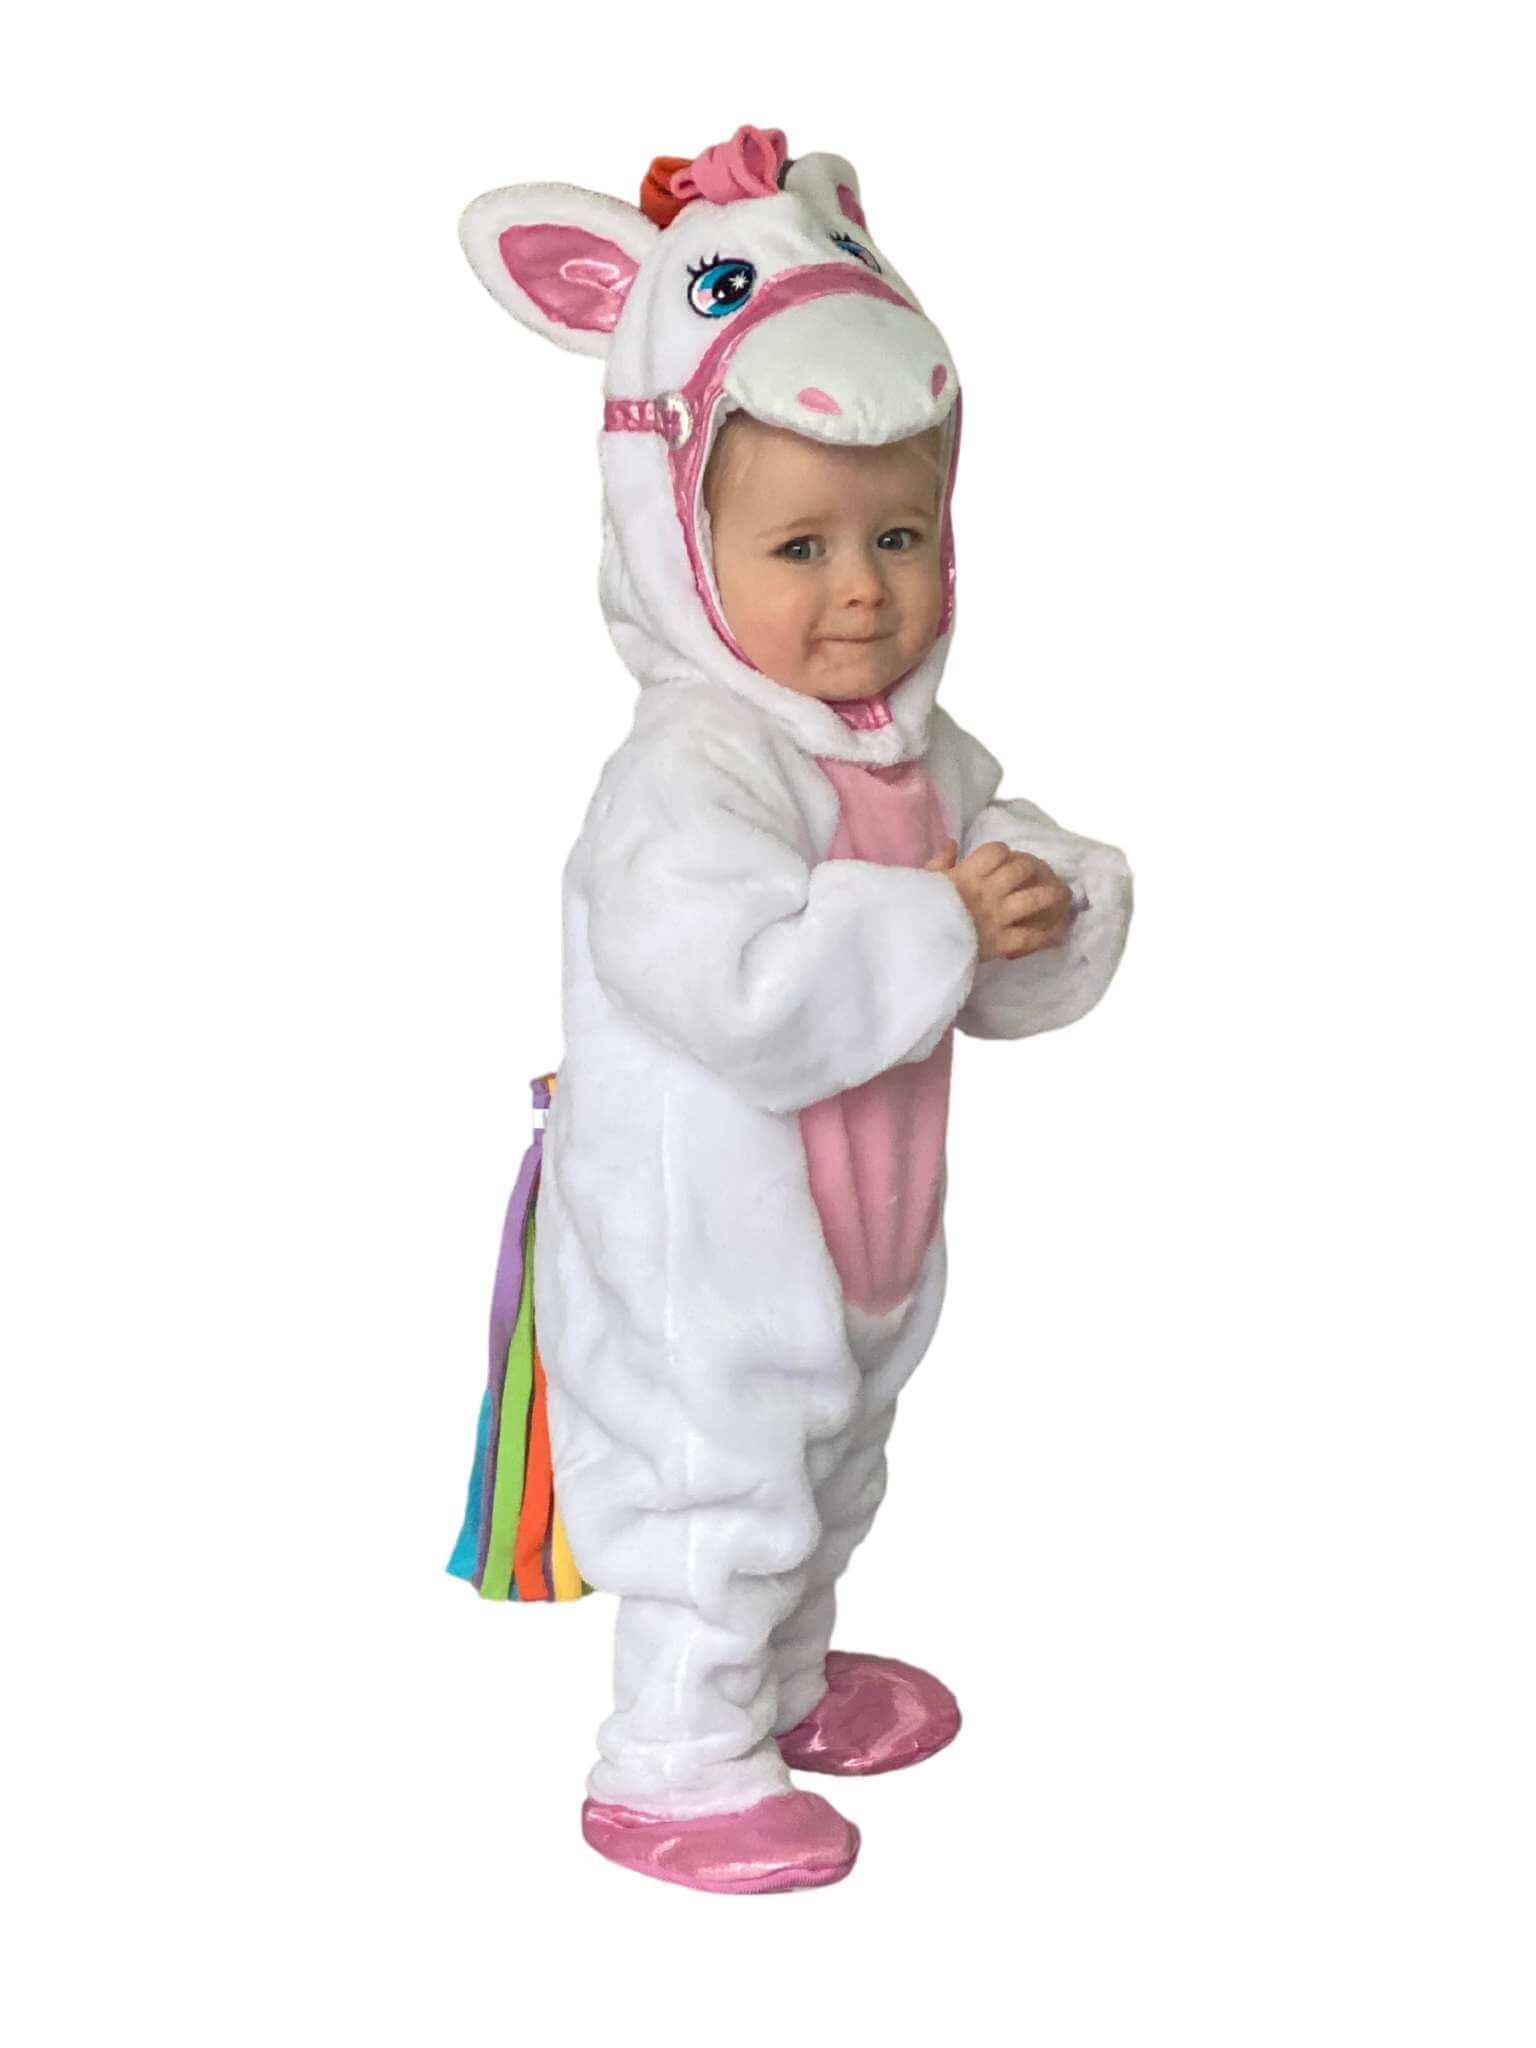 Side view of the toddler in the unicorn costume showing the colourful tail.